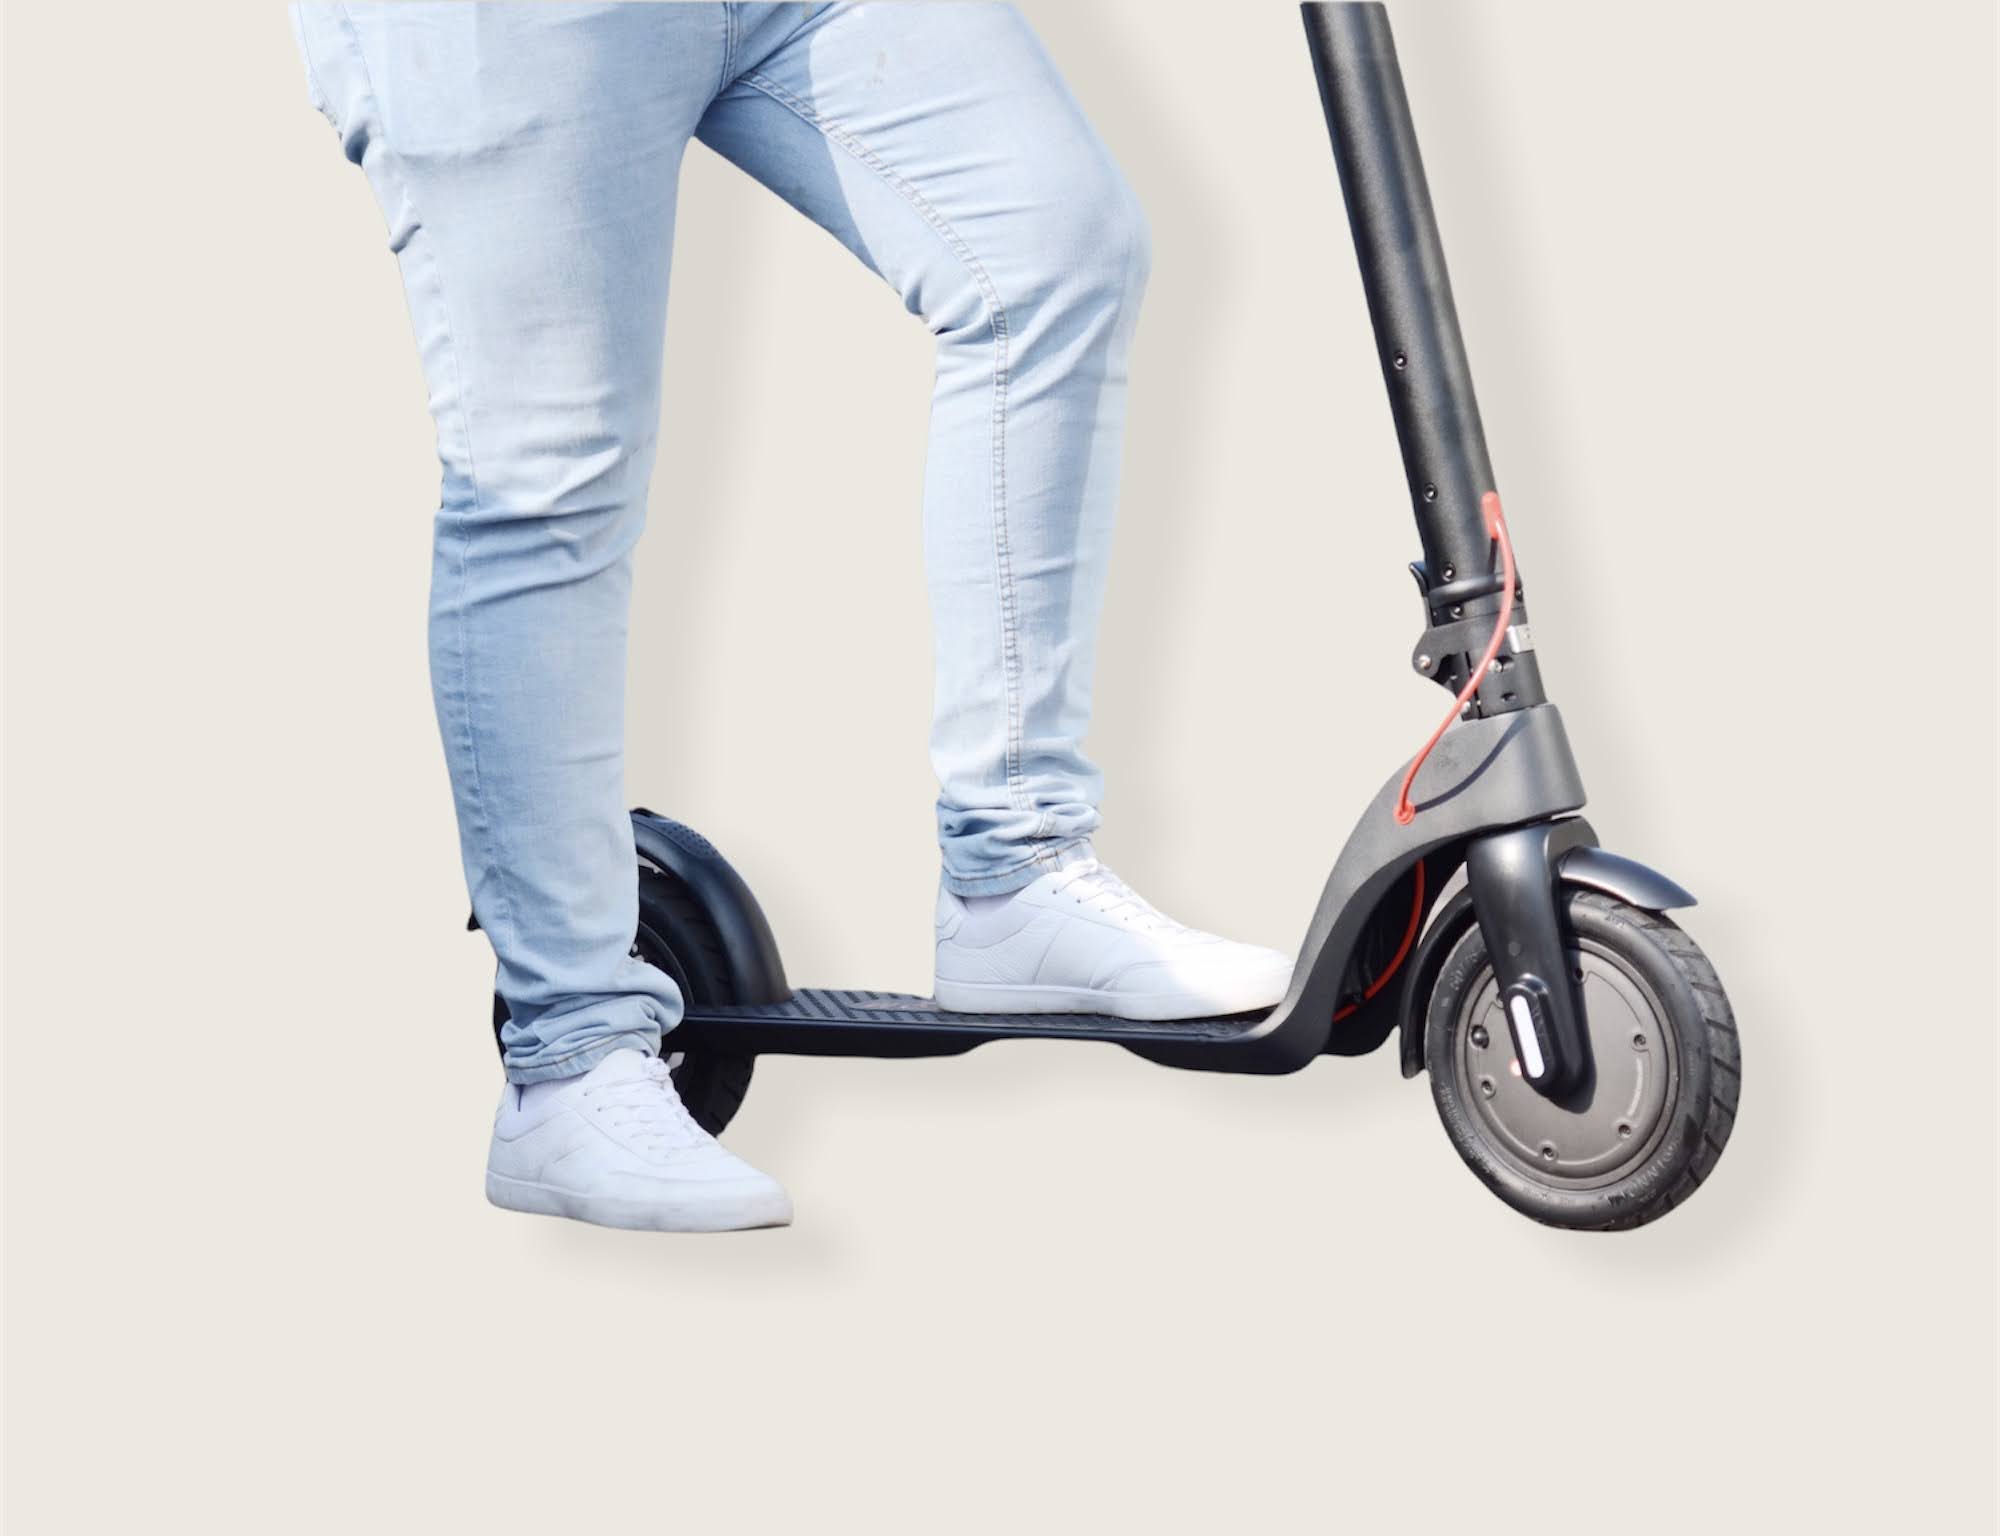 Zooom Electric Scooter-Riding Scooters-Zooom-Chain Driven Cycles-Bike Shop-Ireland